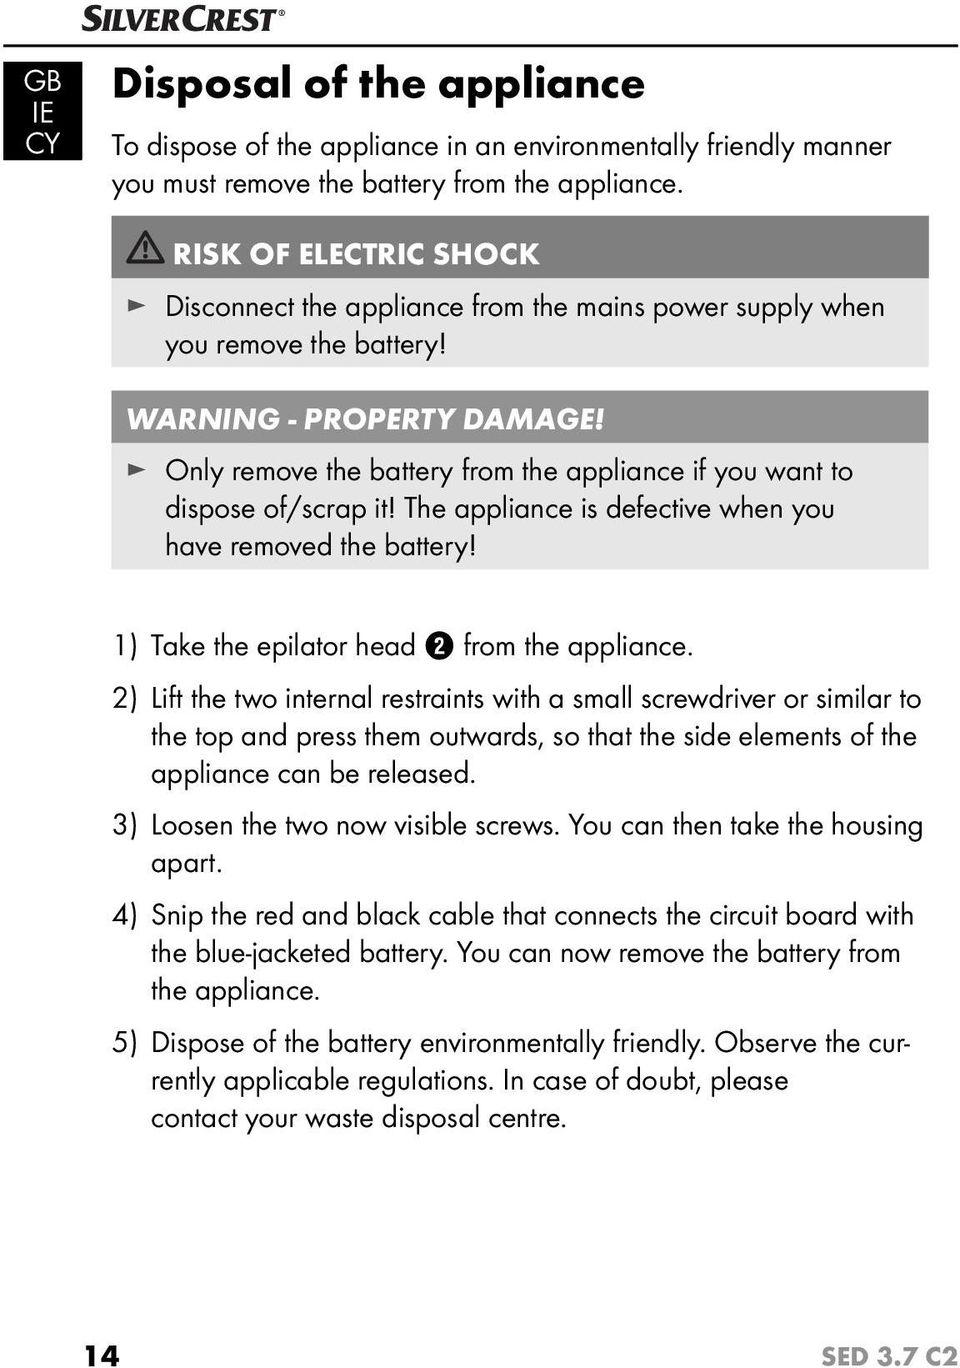 Only remove the battery from the appliance if you want to dispose of/scrap it! The appliance is defective when you have removed the battery! 1) Take the epilator head 2 from the appliance.